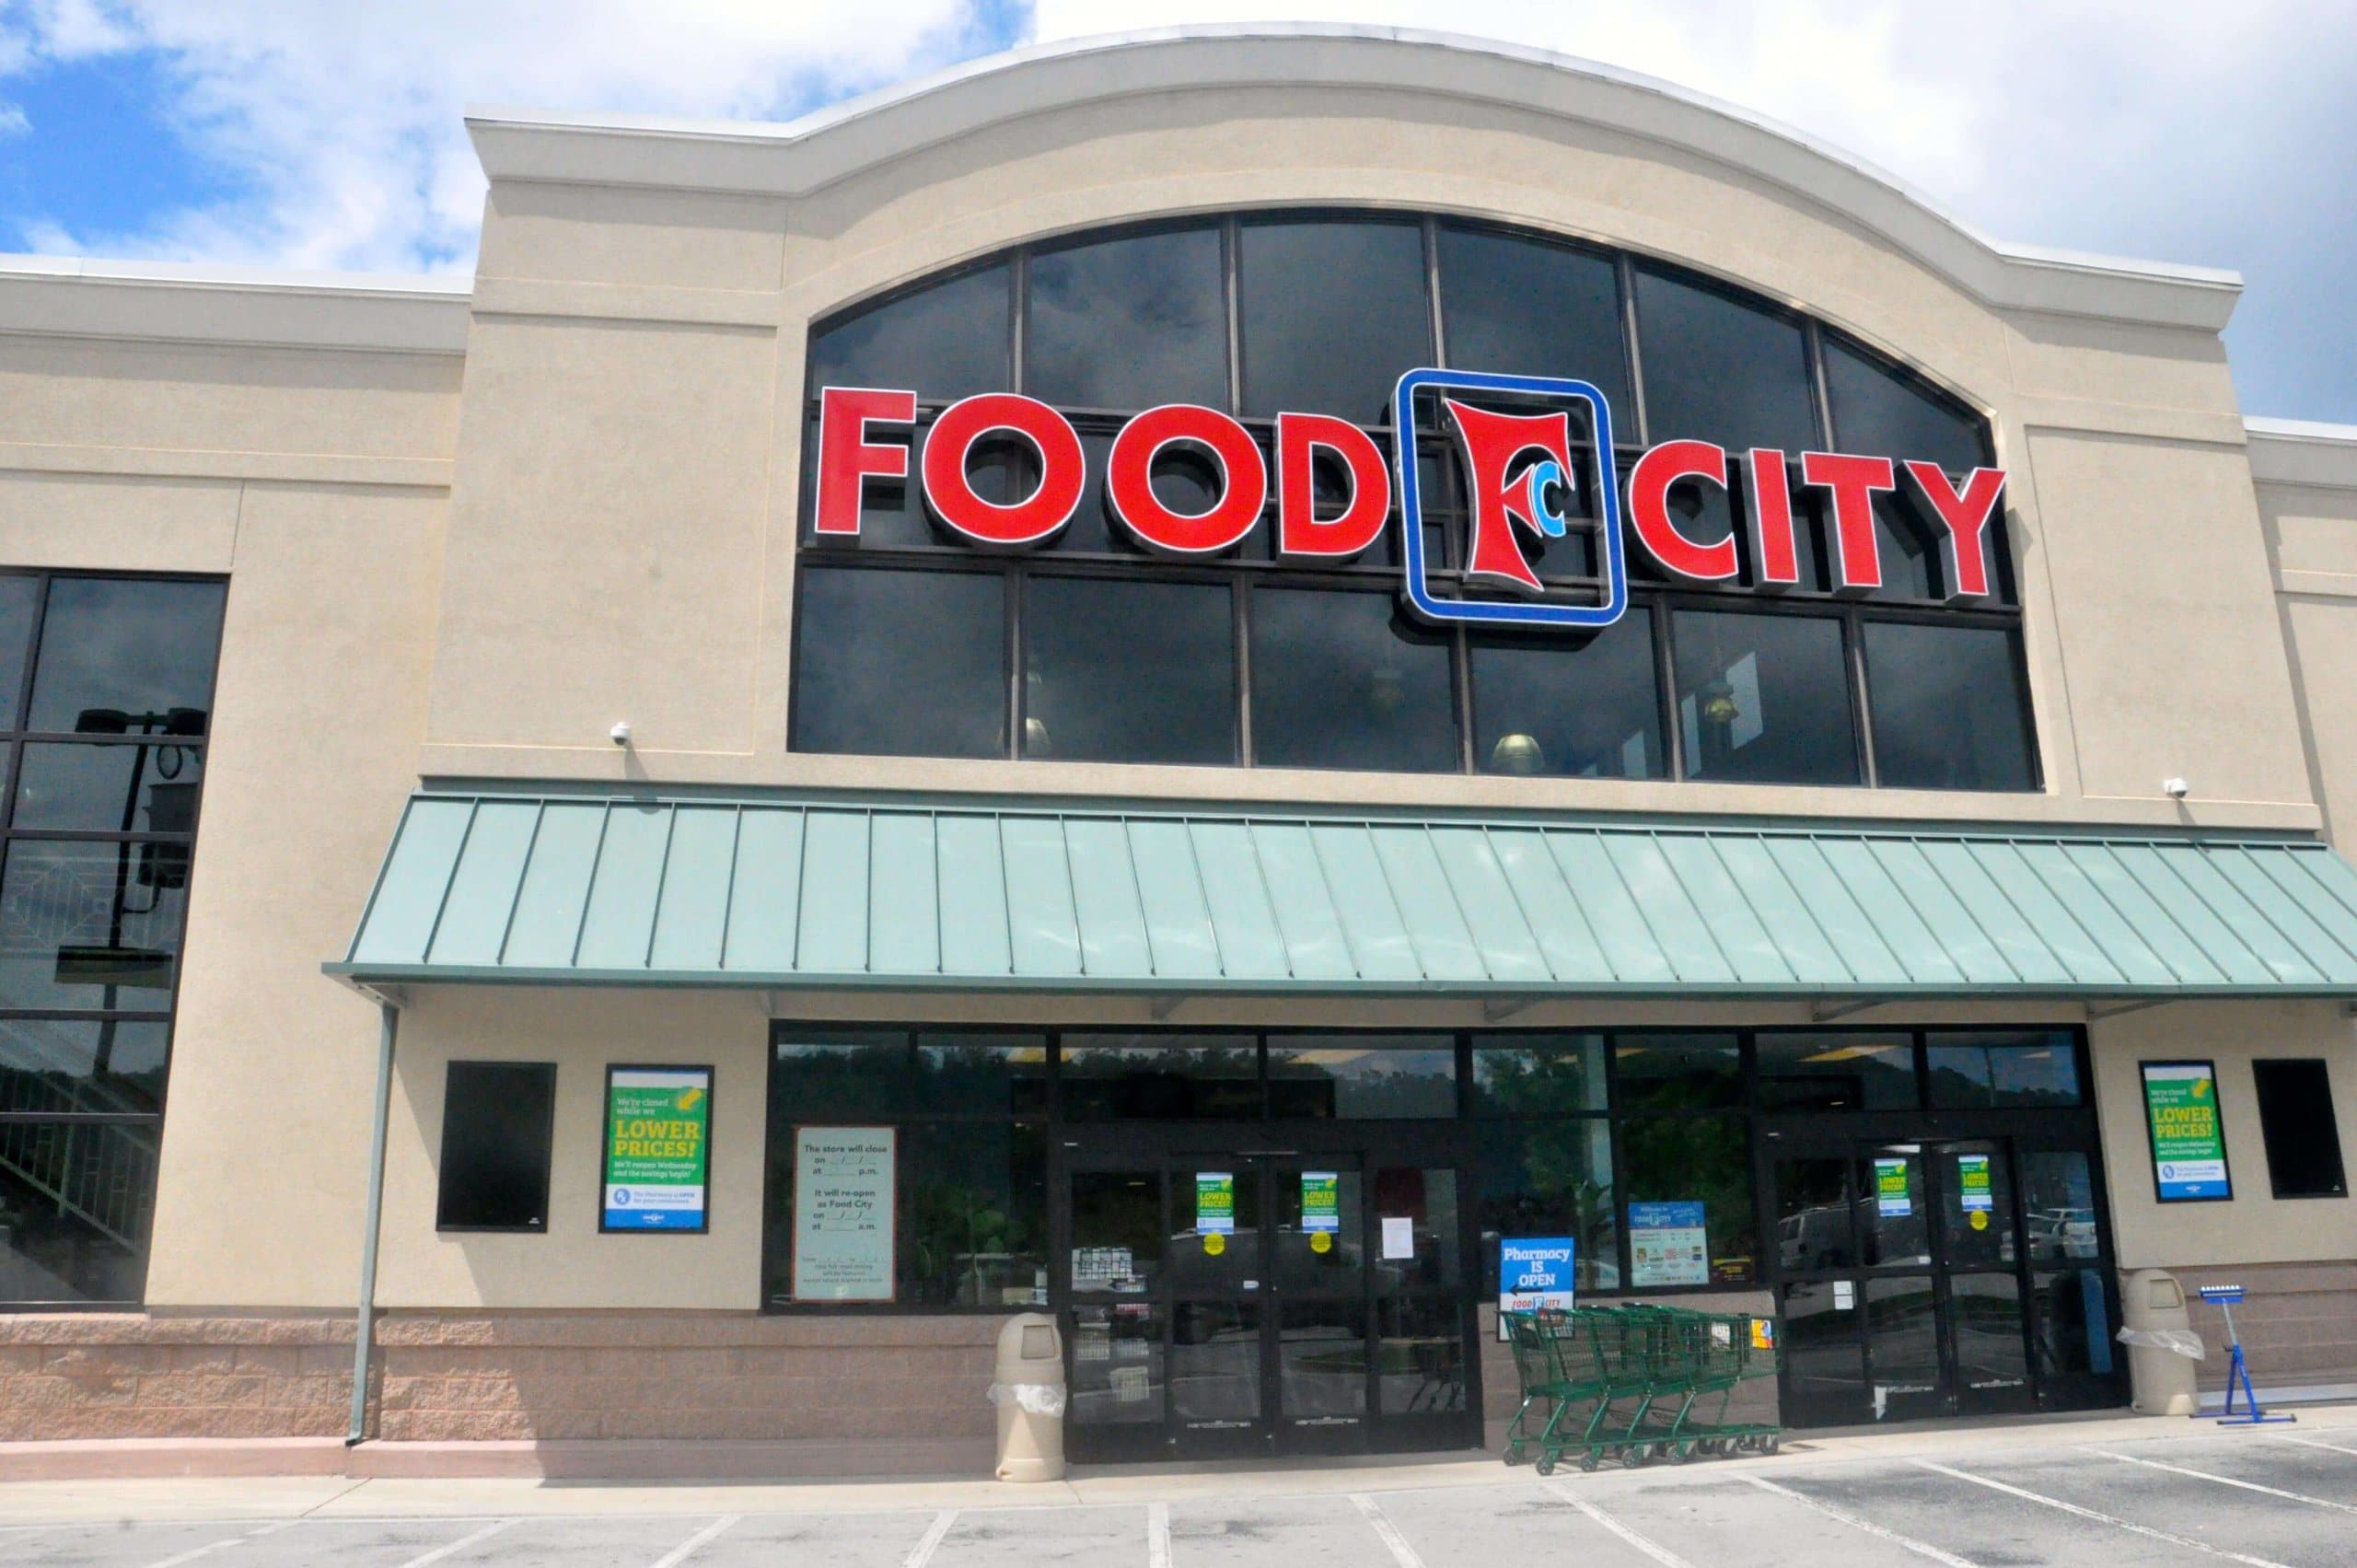 outside of a Food City store with words in large red letters